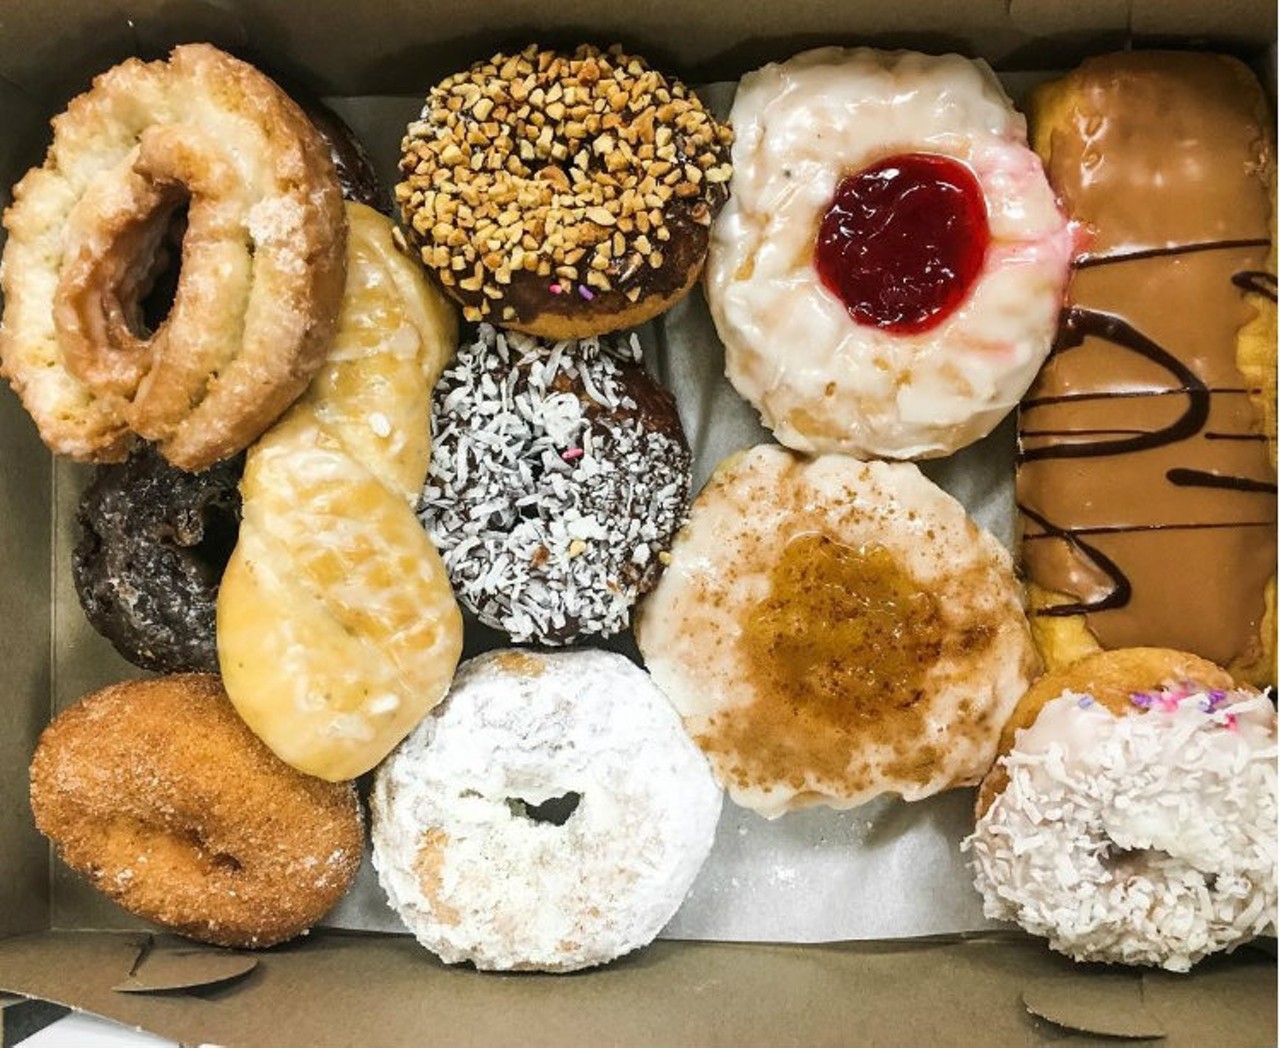 Best Doughnuts 2019 | Old Town Donuts | Food & Drink | St. Louis